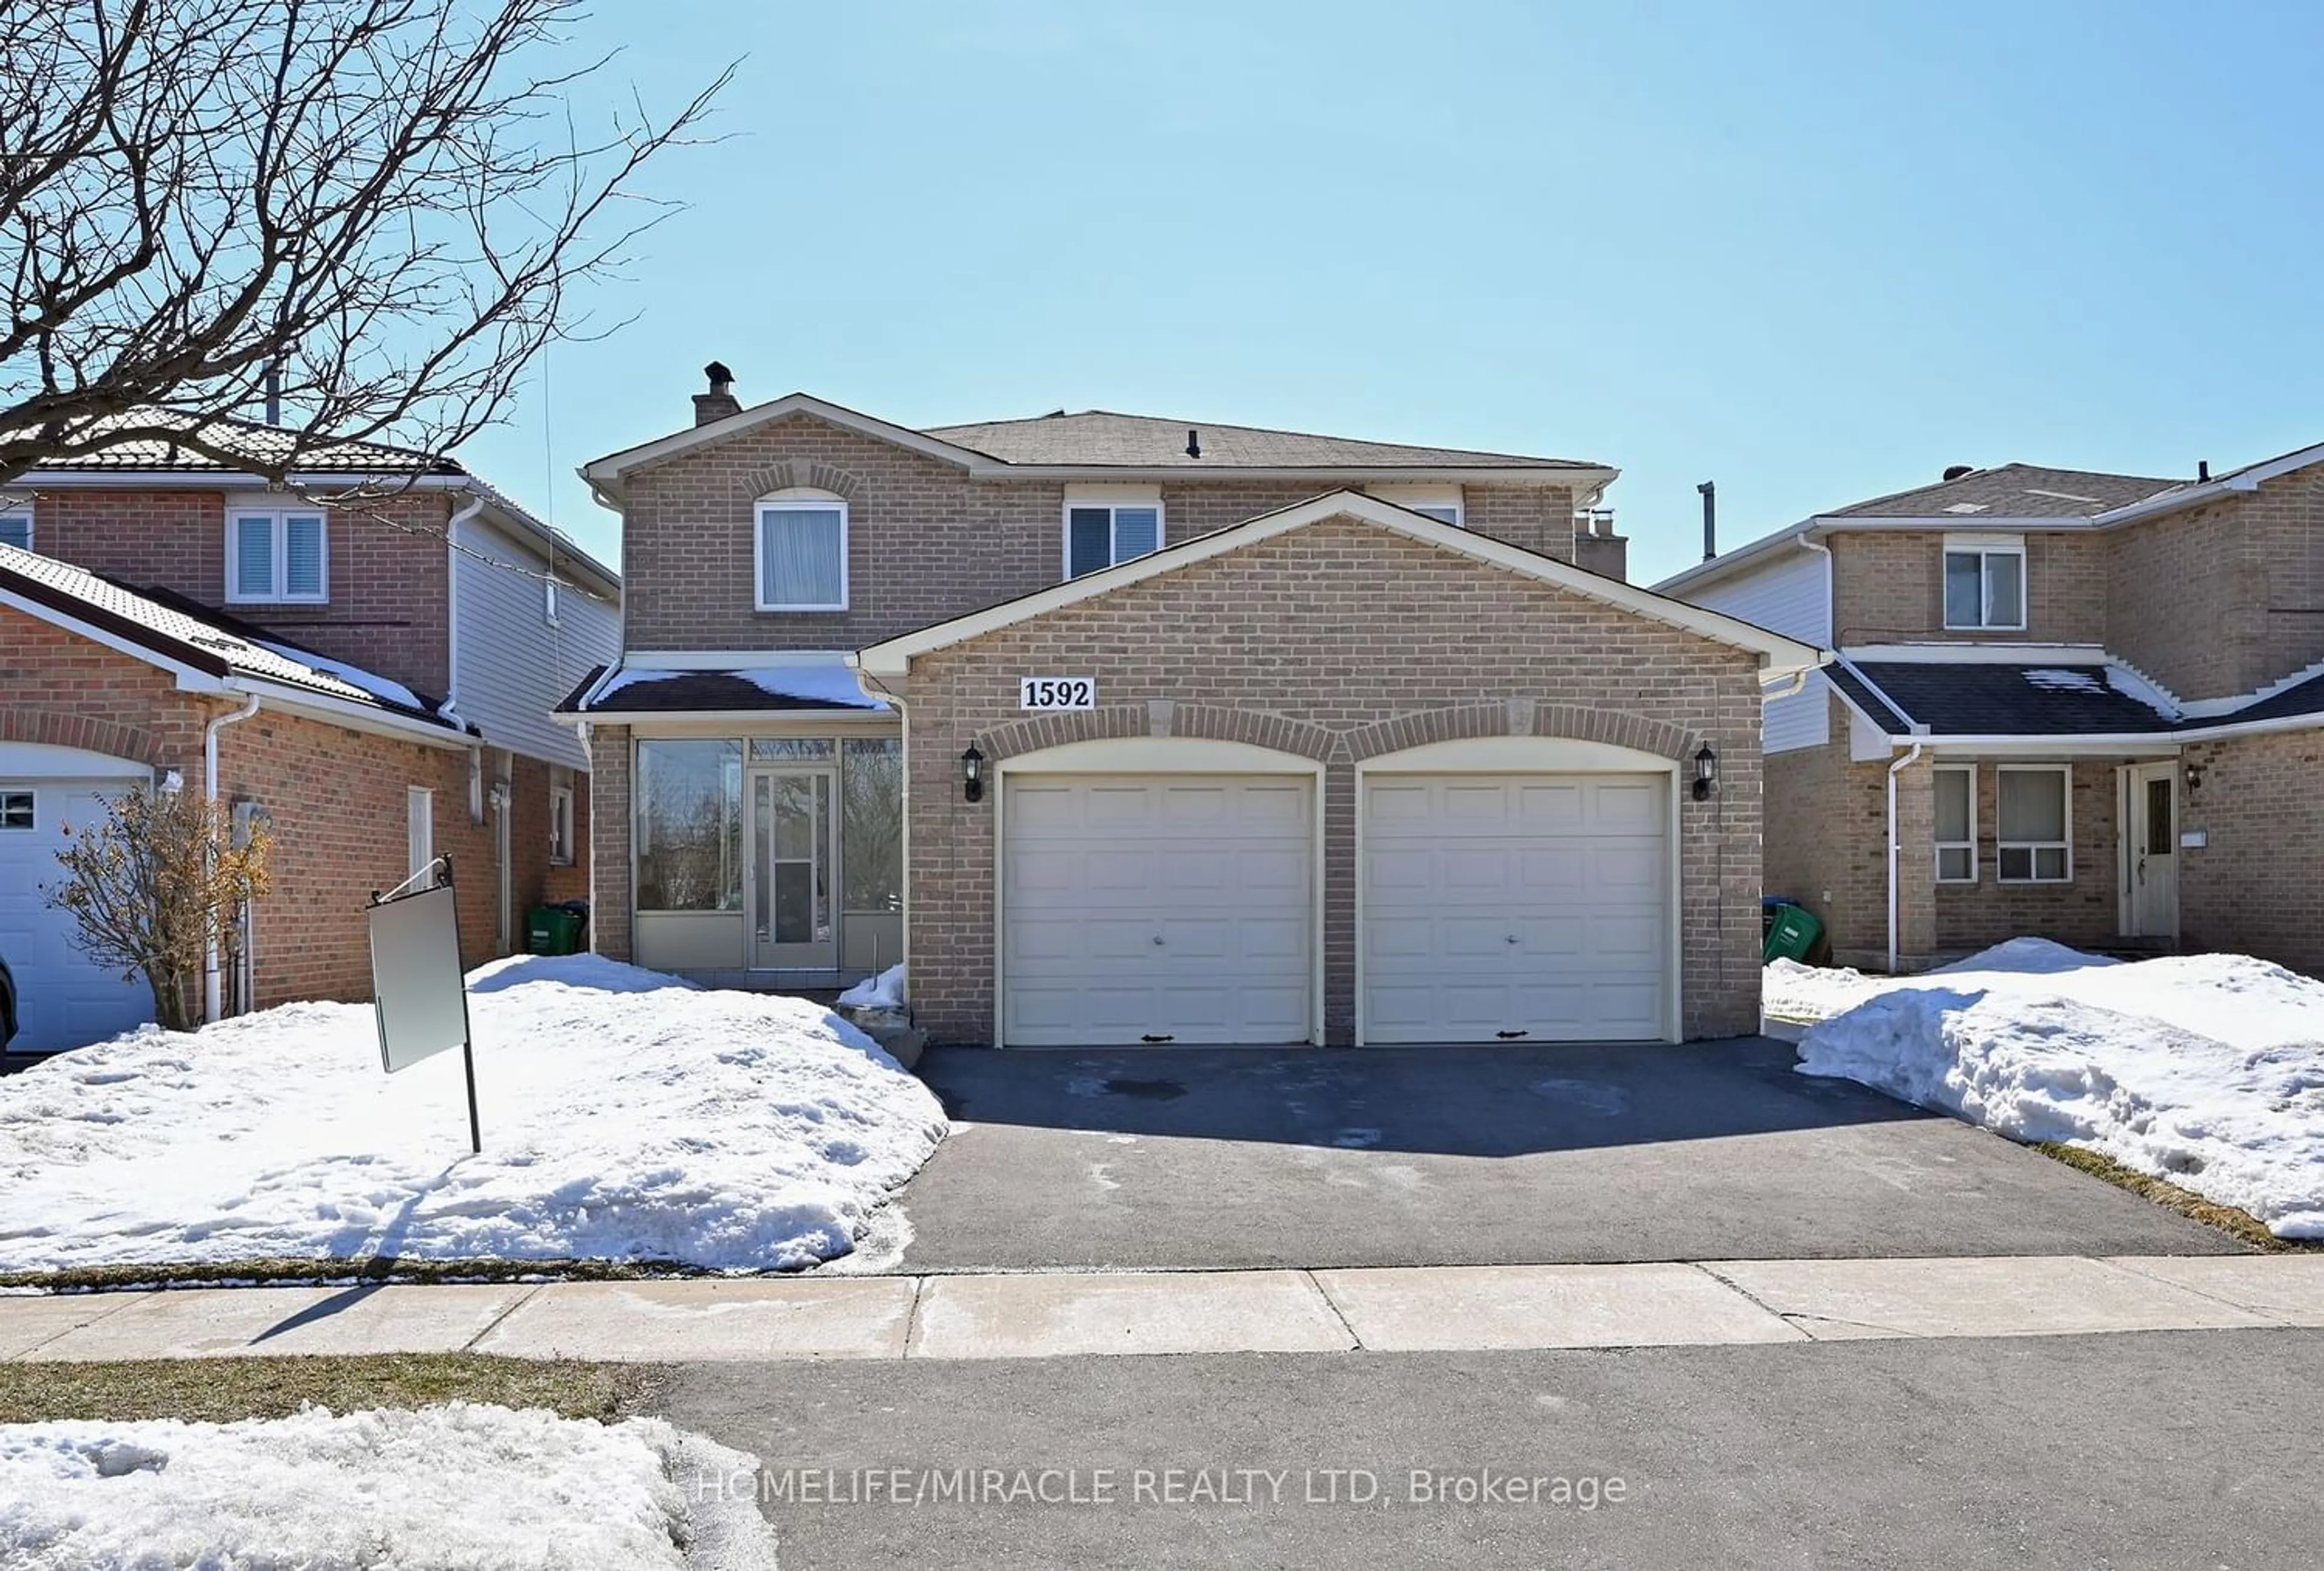 A pic from exterior of the house or condo for 1592 Willow Way, Mississauga Ontario L5M 3W7